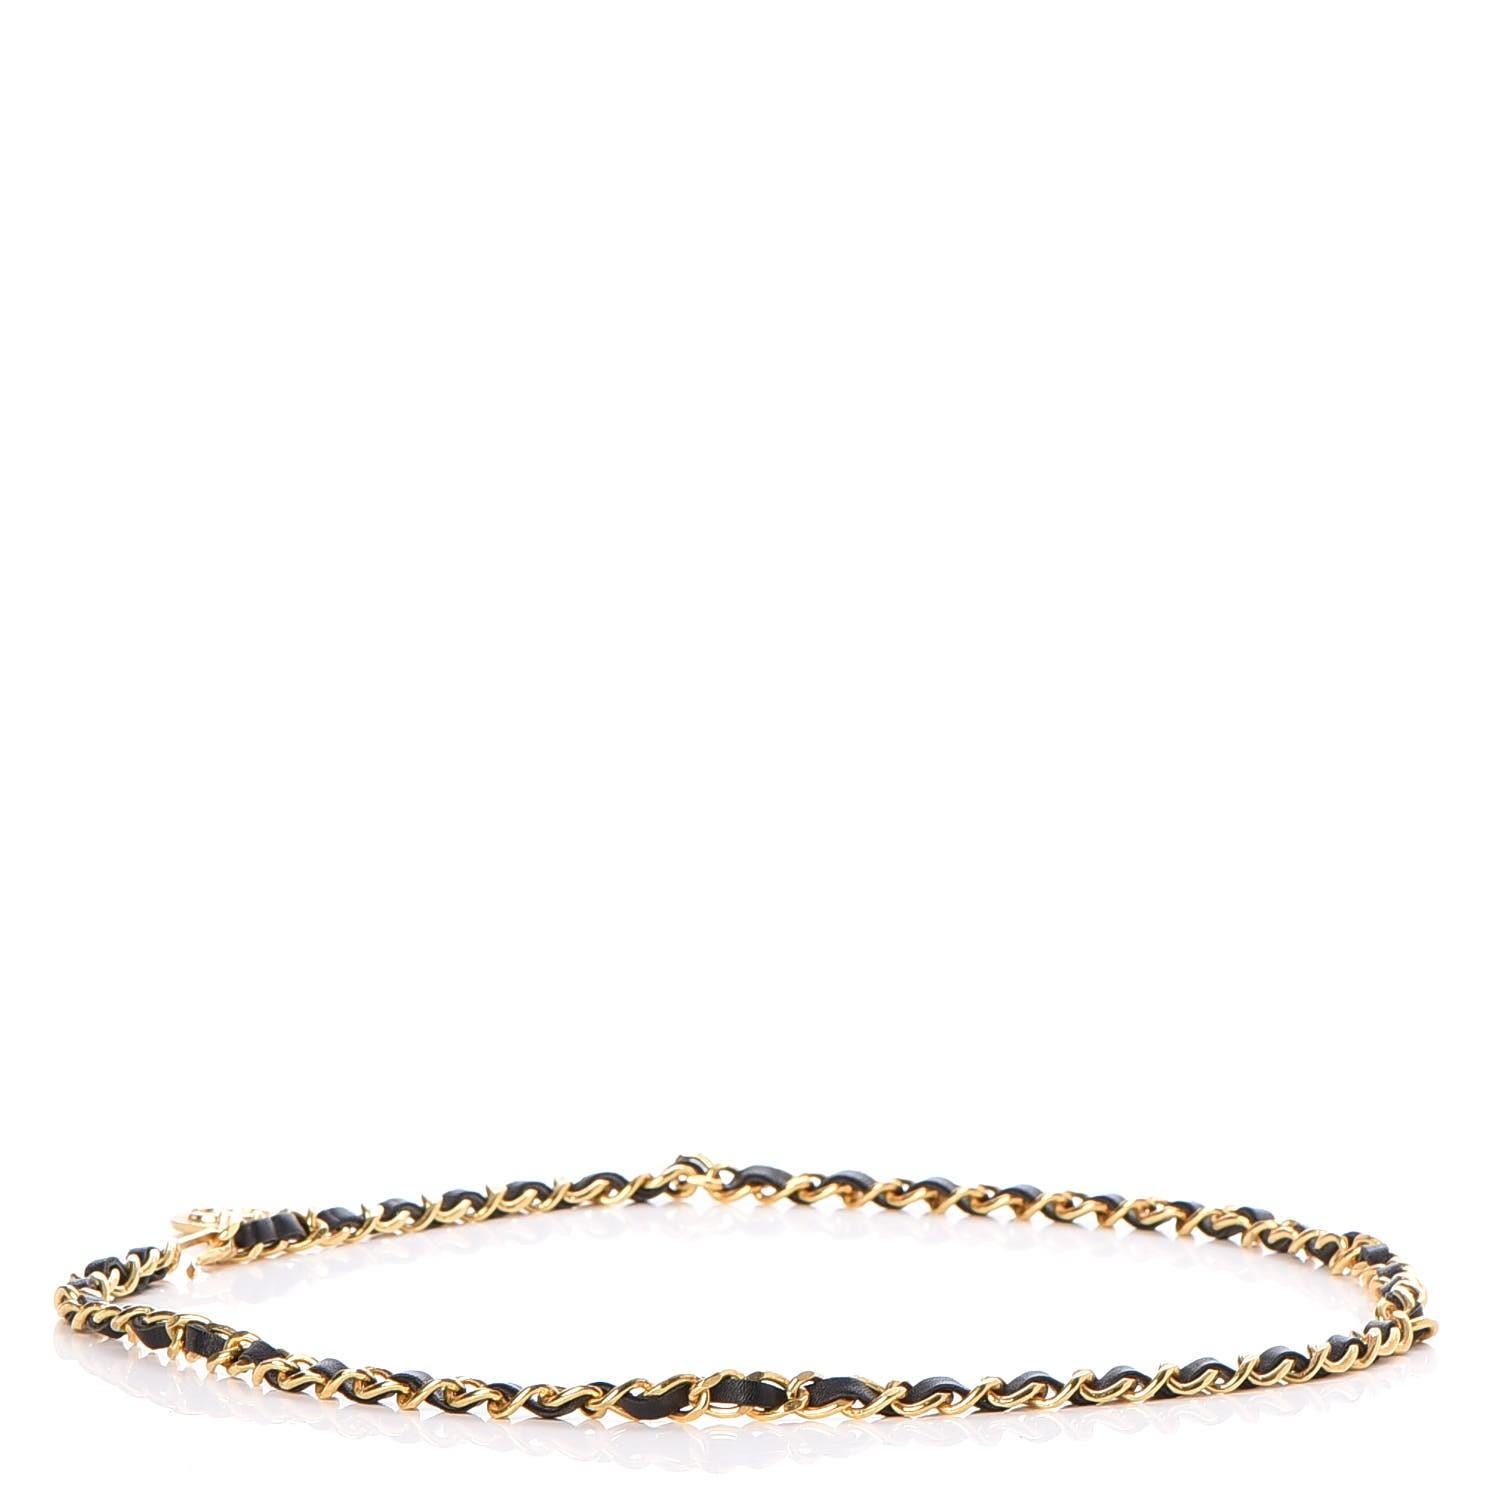 Chanel gold tone chain interlaced with black Leather and features a medallion with 31 Rue Cambon Paris engraved.

COLOR: Gold and black
MATERIAL: Metal and leather
MEASURES: Length of chain 37.5”. Medallion diameter 1.2”.
COMES WITH: Chanel box.